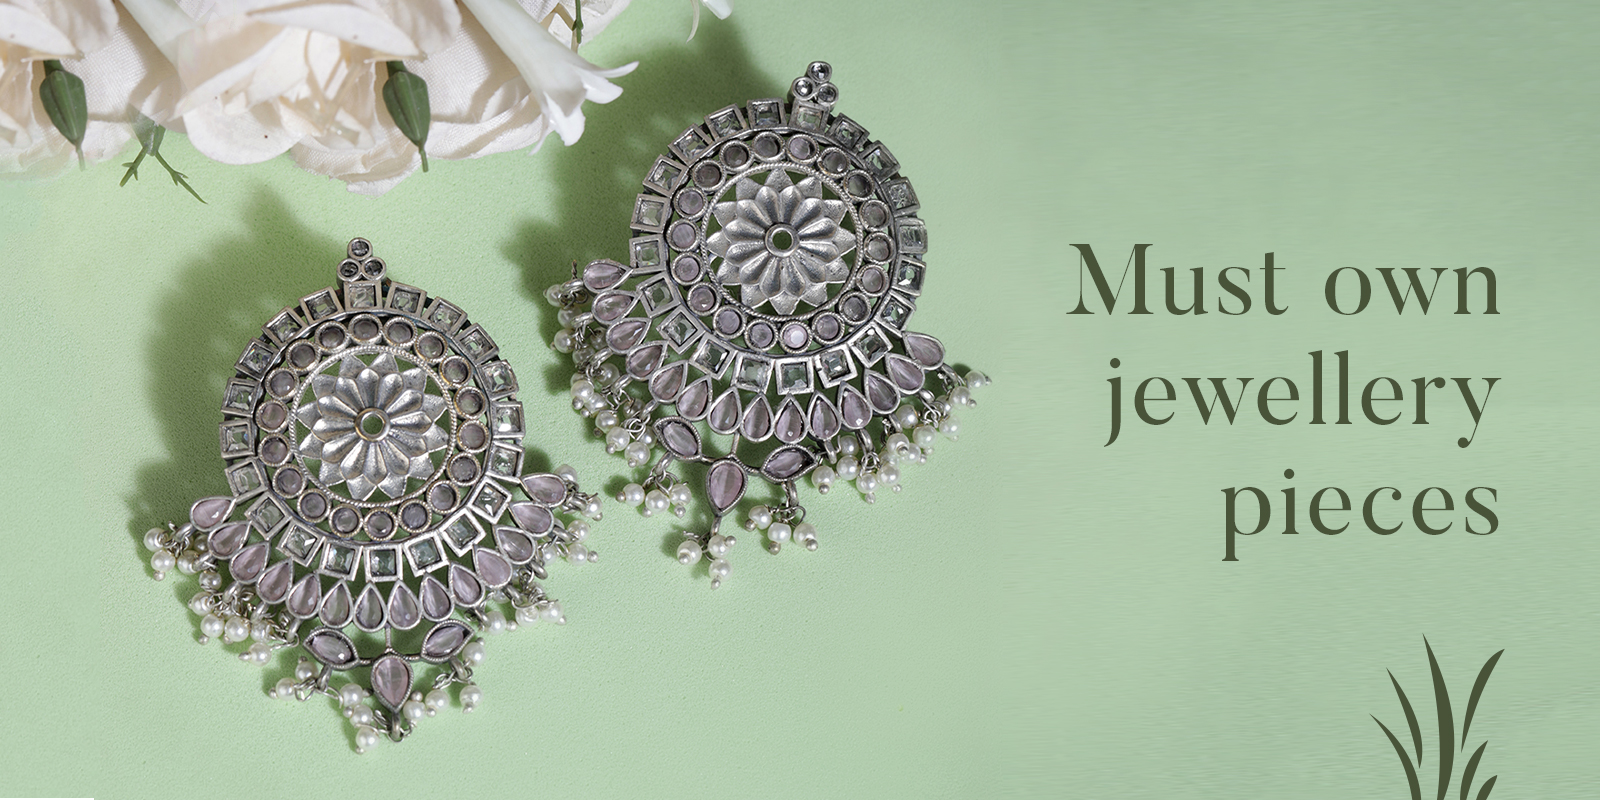 Must own jewellery pieces